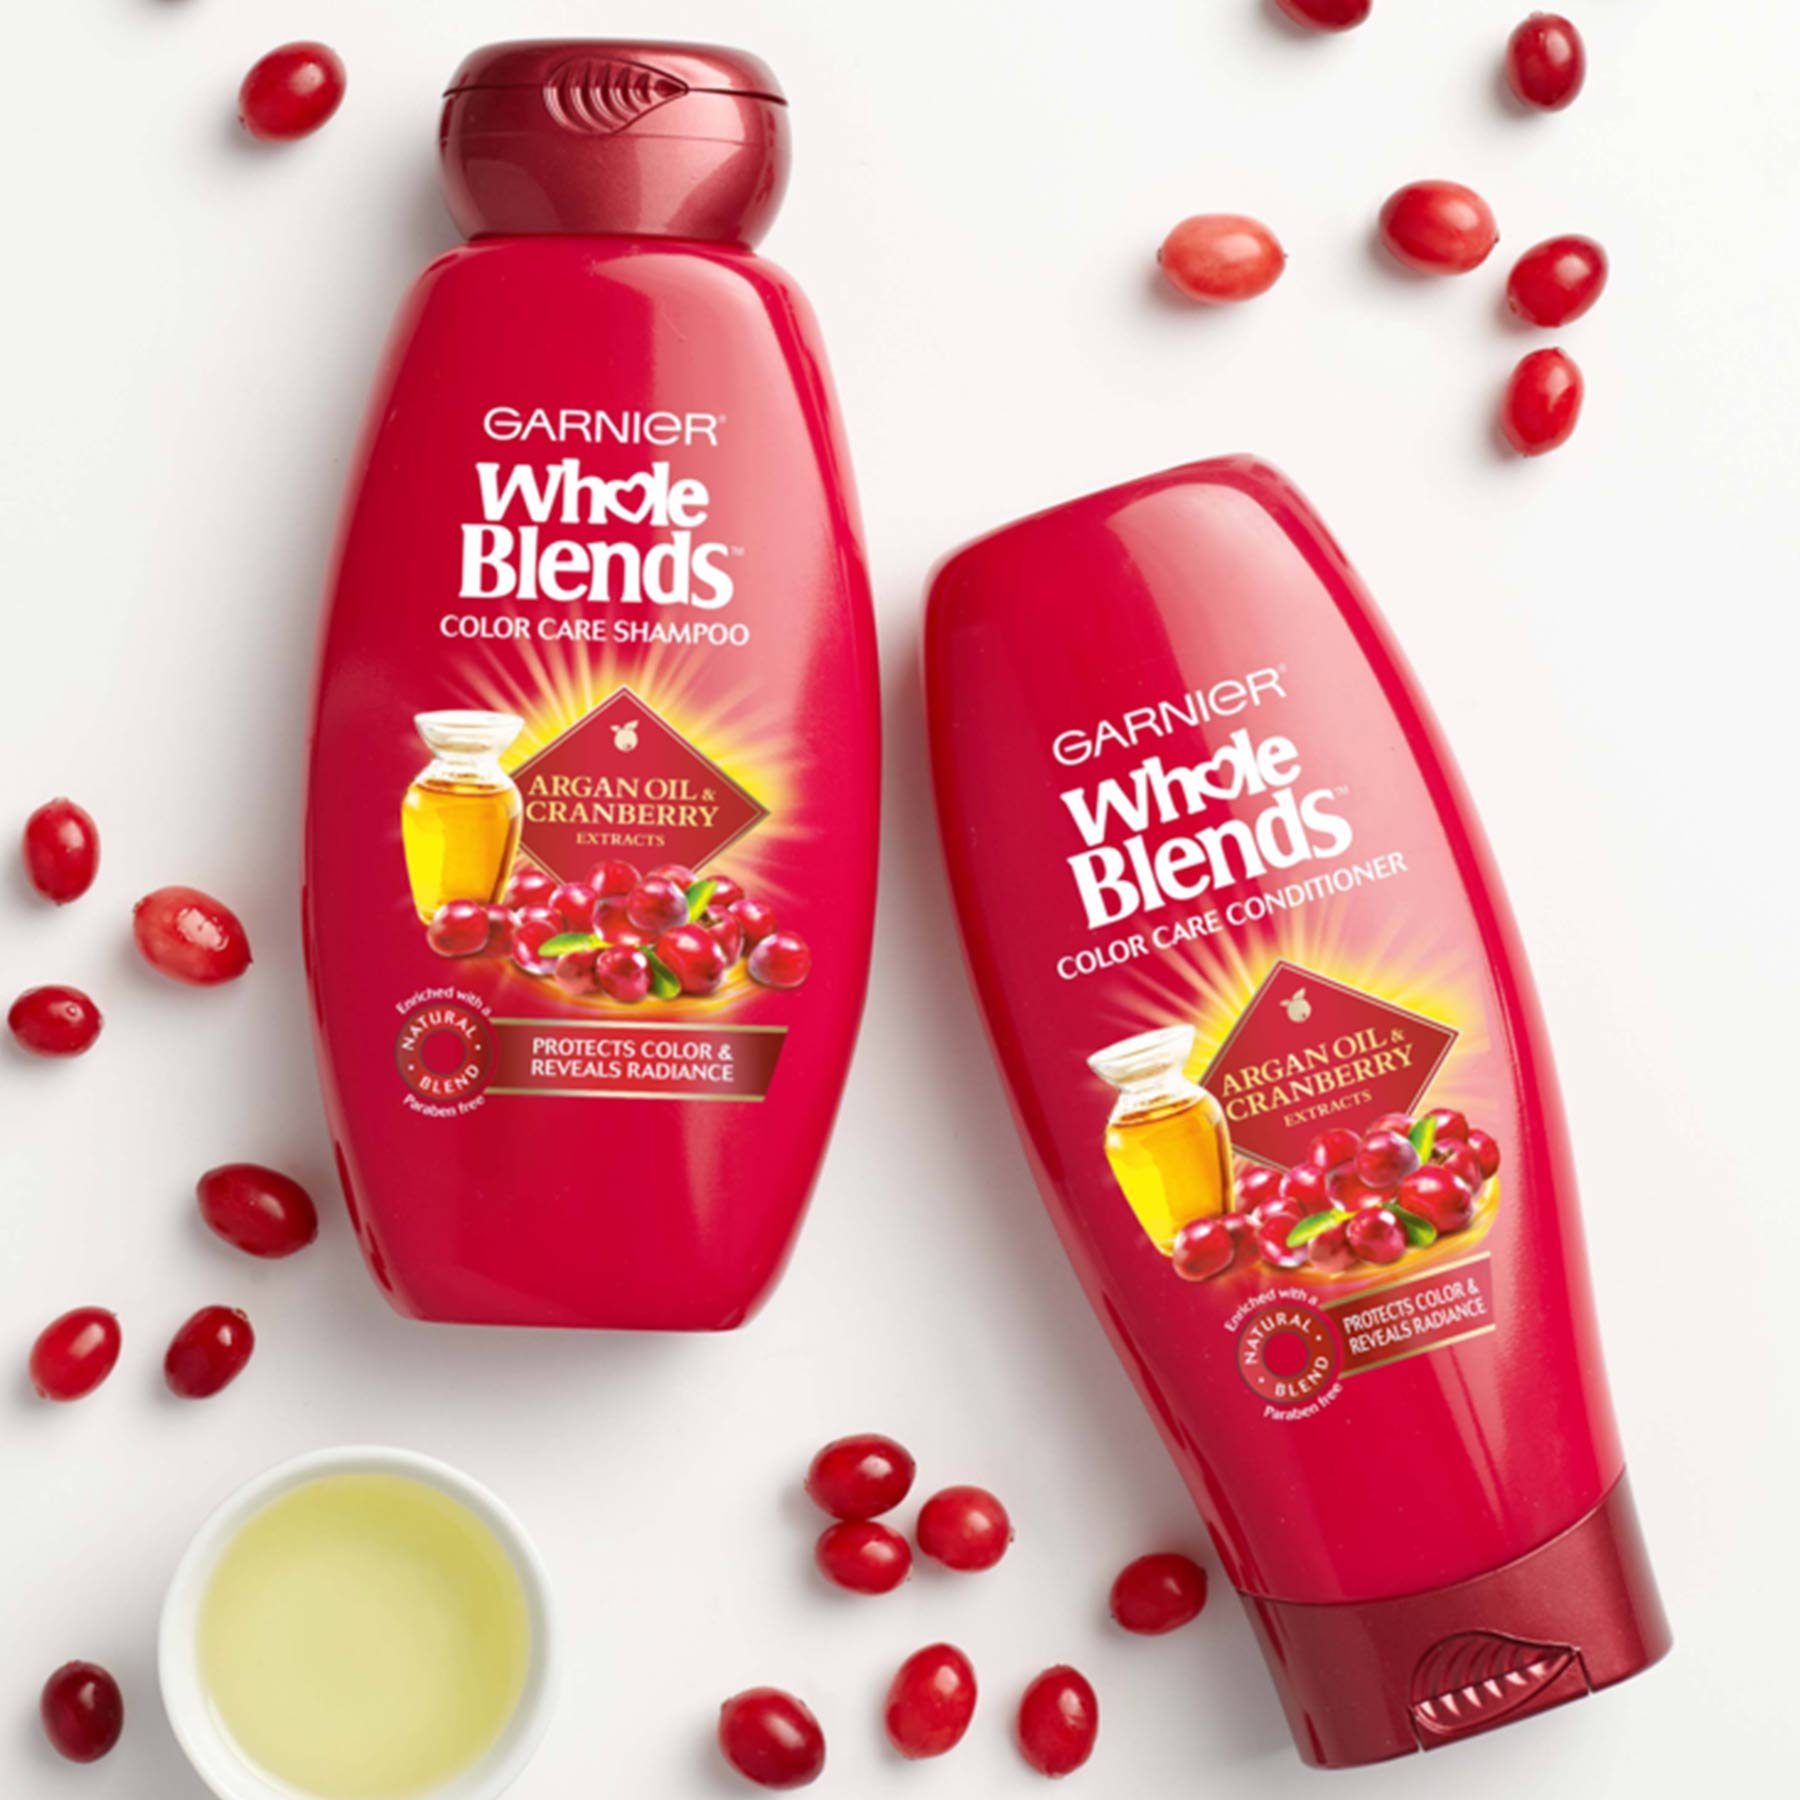 Whole Blends Color Care Shampoo with Argan Oil and Cranberry and Color Care Conditioner with Argan Oil and Cranberry on a white background strewn with whole cranberries and a ramekin of oil.